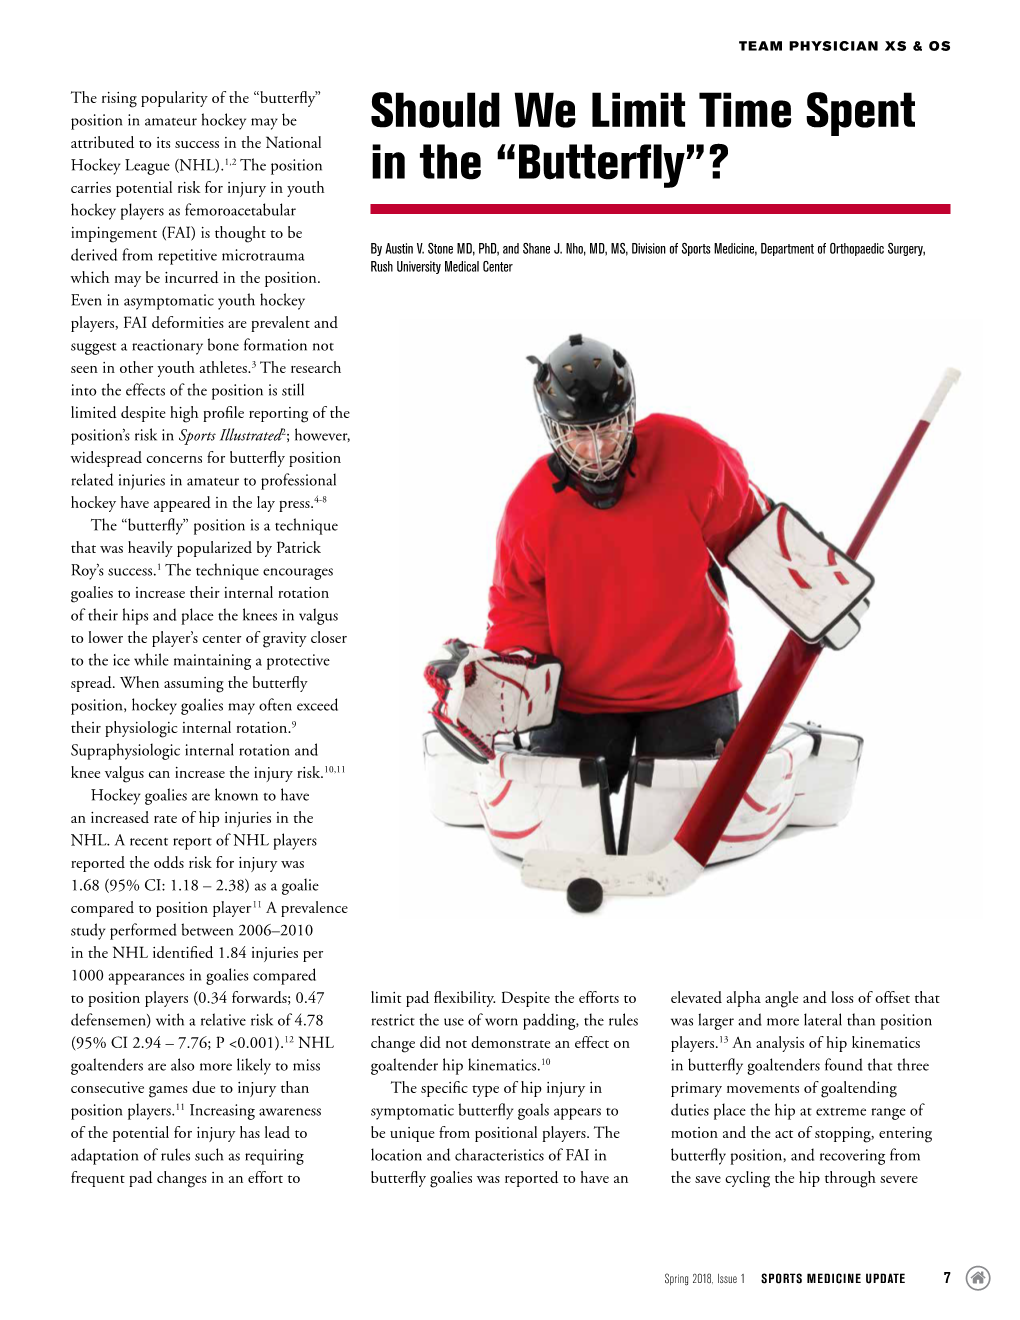 “Butterfly”? Hockey Players As Femoroacetabular Impingement (FAI) Is Thought to Be Derived from Repetitive Microtrauma by Austin V